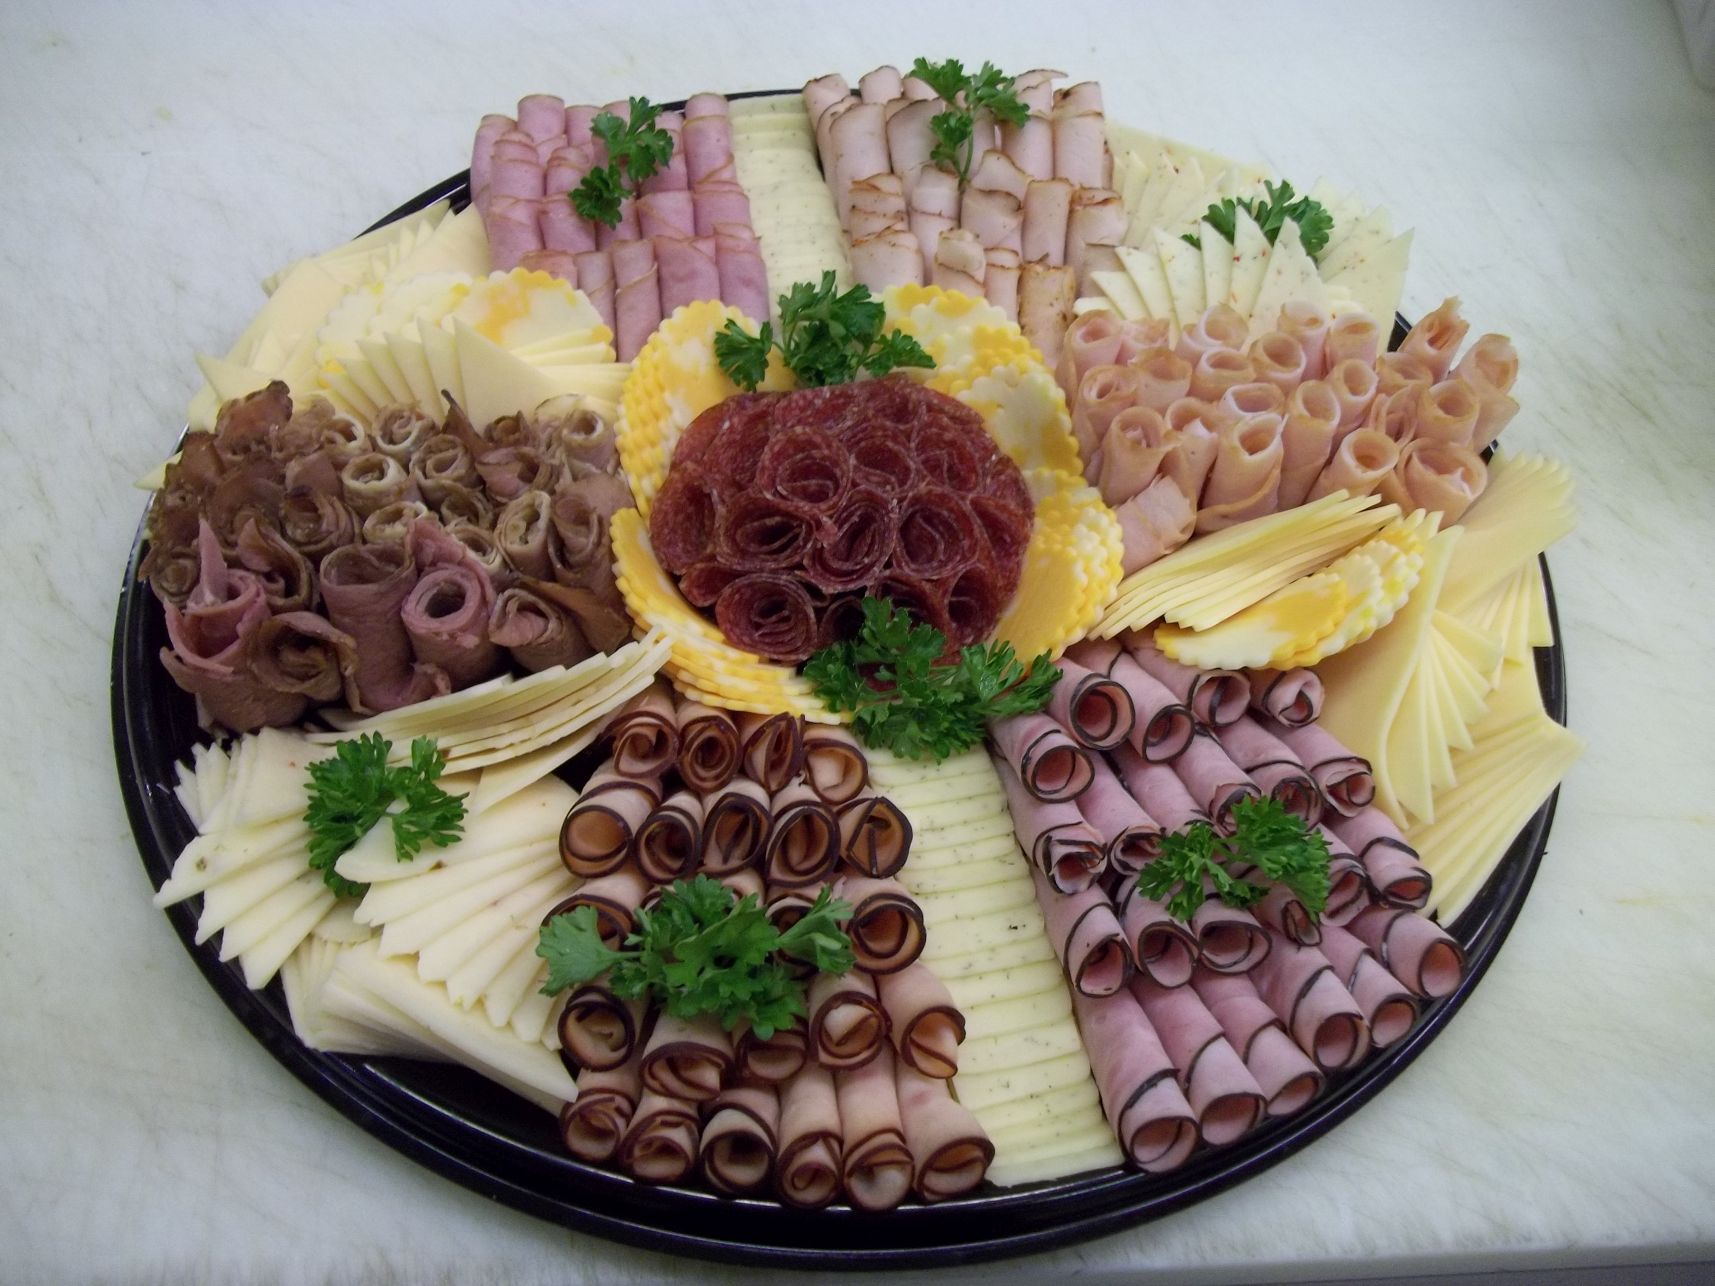 deli meats, cheese, and pastries